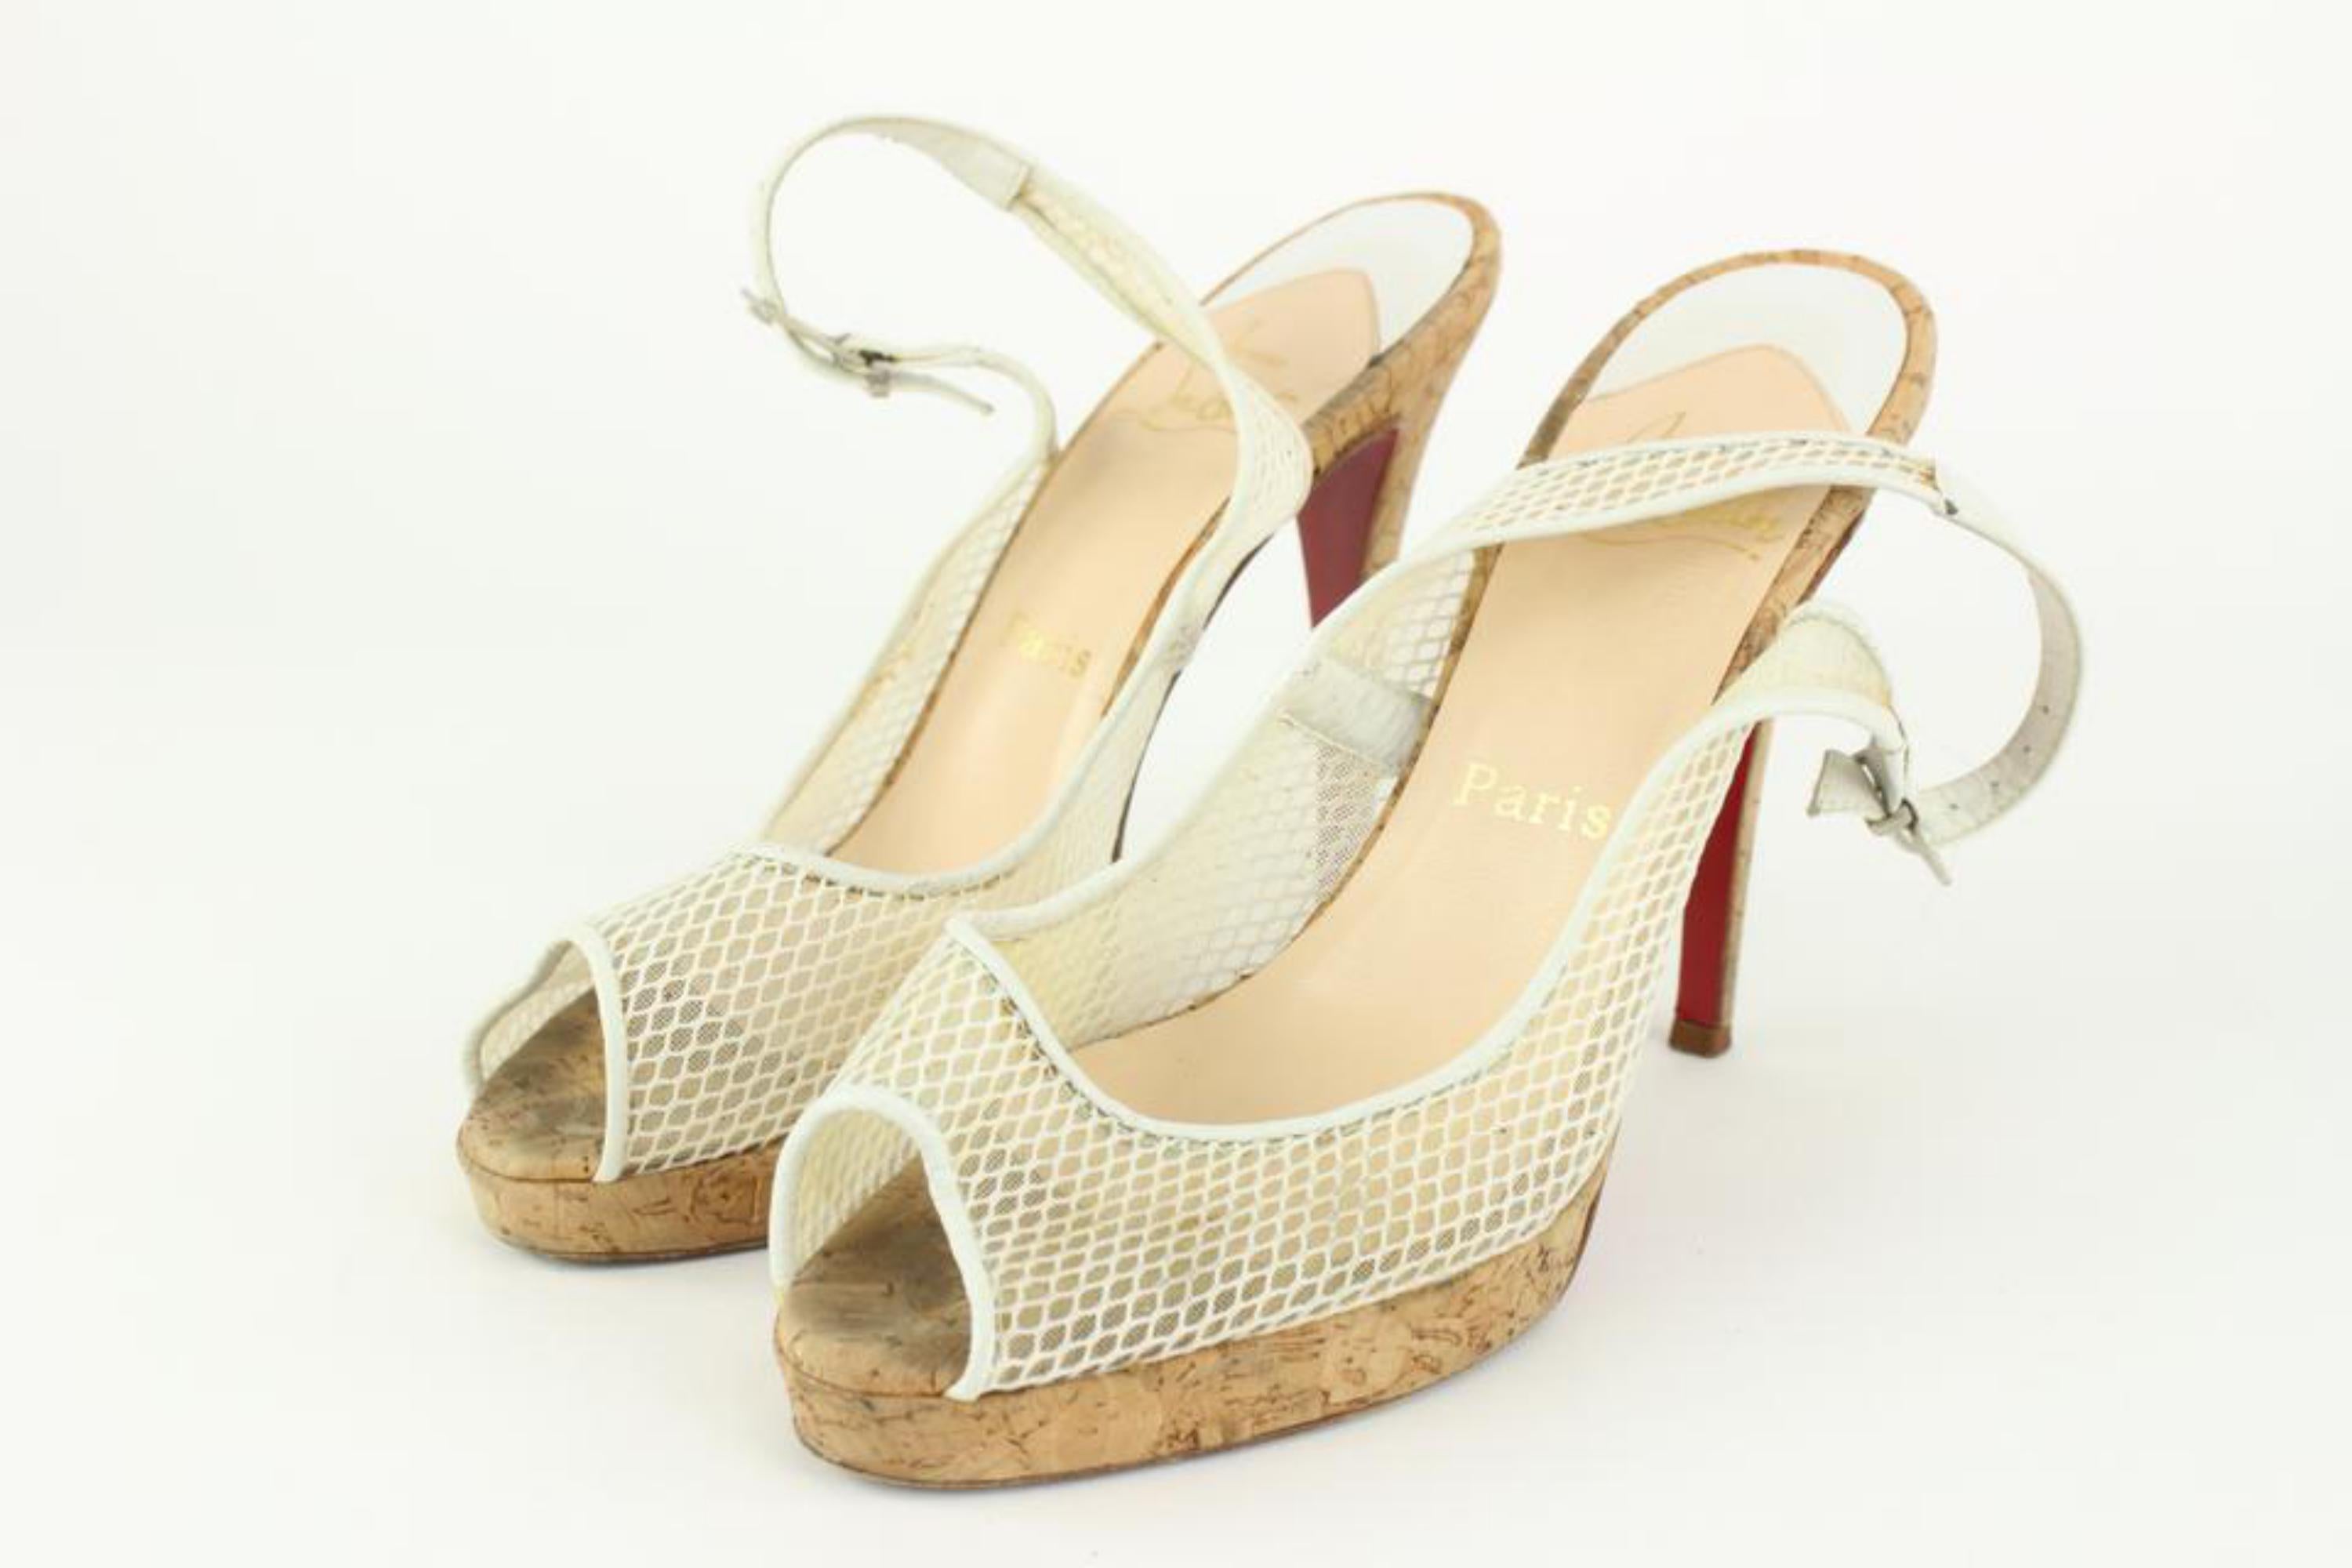 Christian Louboutin Size 38 White Mesh Cork Sling Platform Mademoiselle Merchand 127cl23
Made In: Italy
Measurements: Length:  9